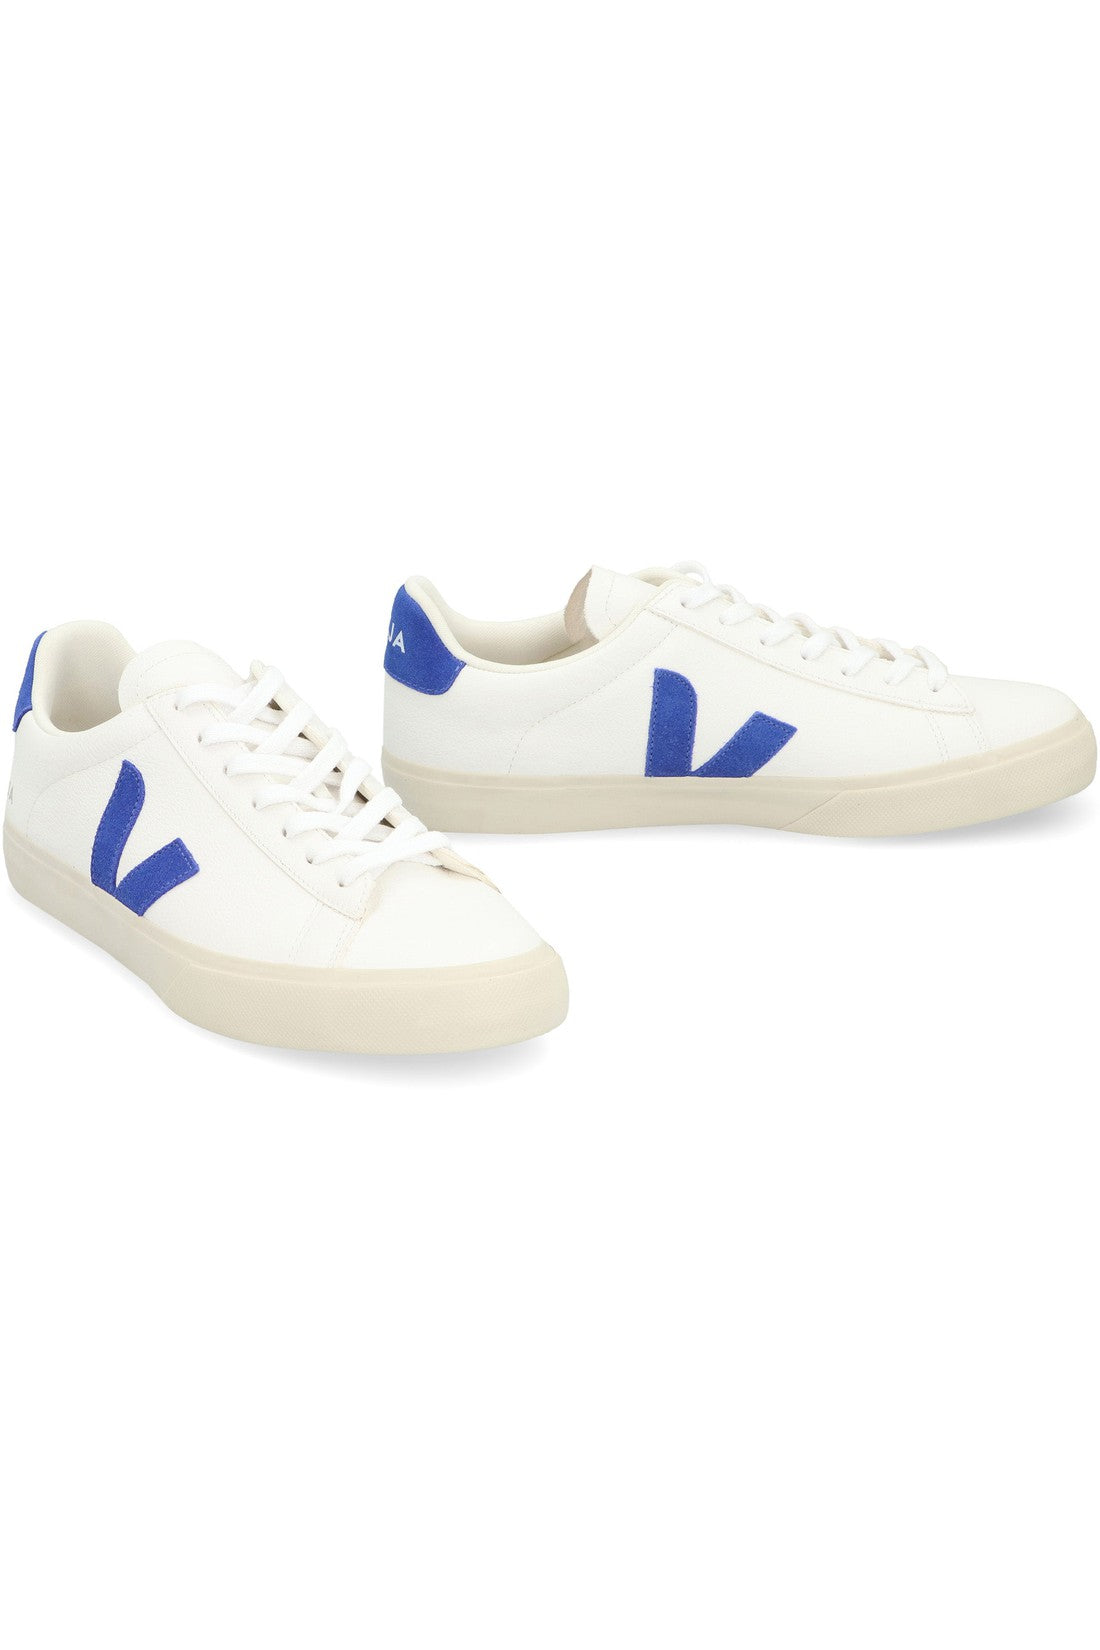 Veja-OUTLET-SALE-Campo leather low-top sneakers-ARCHIVIST